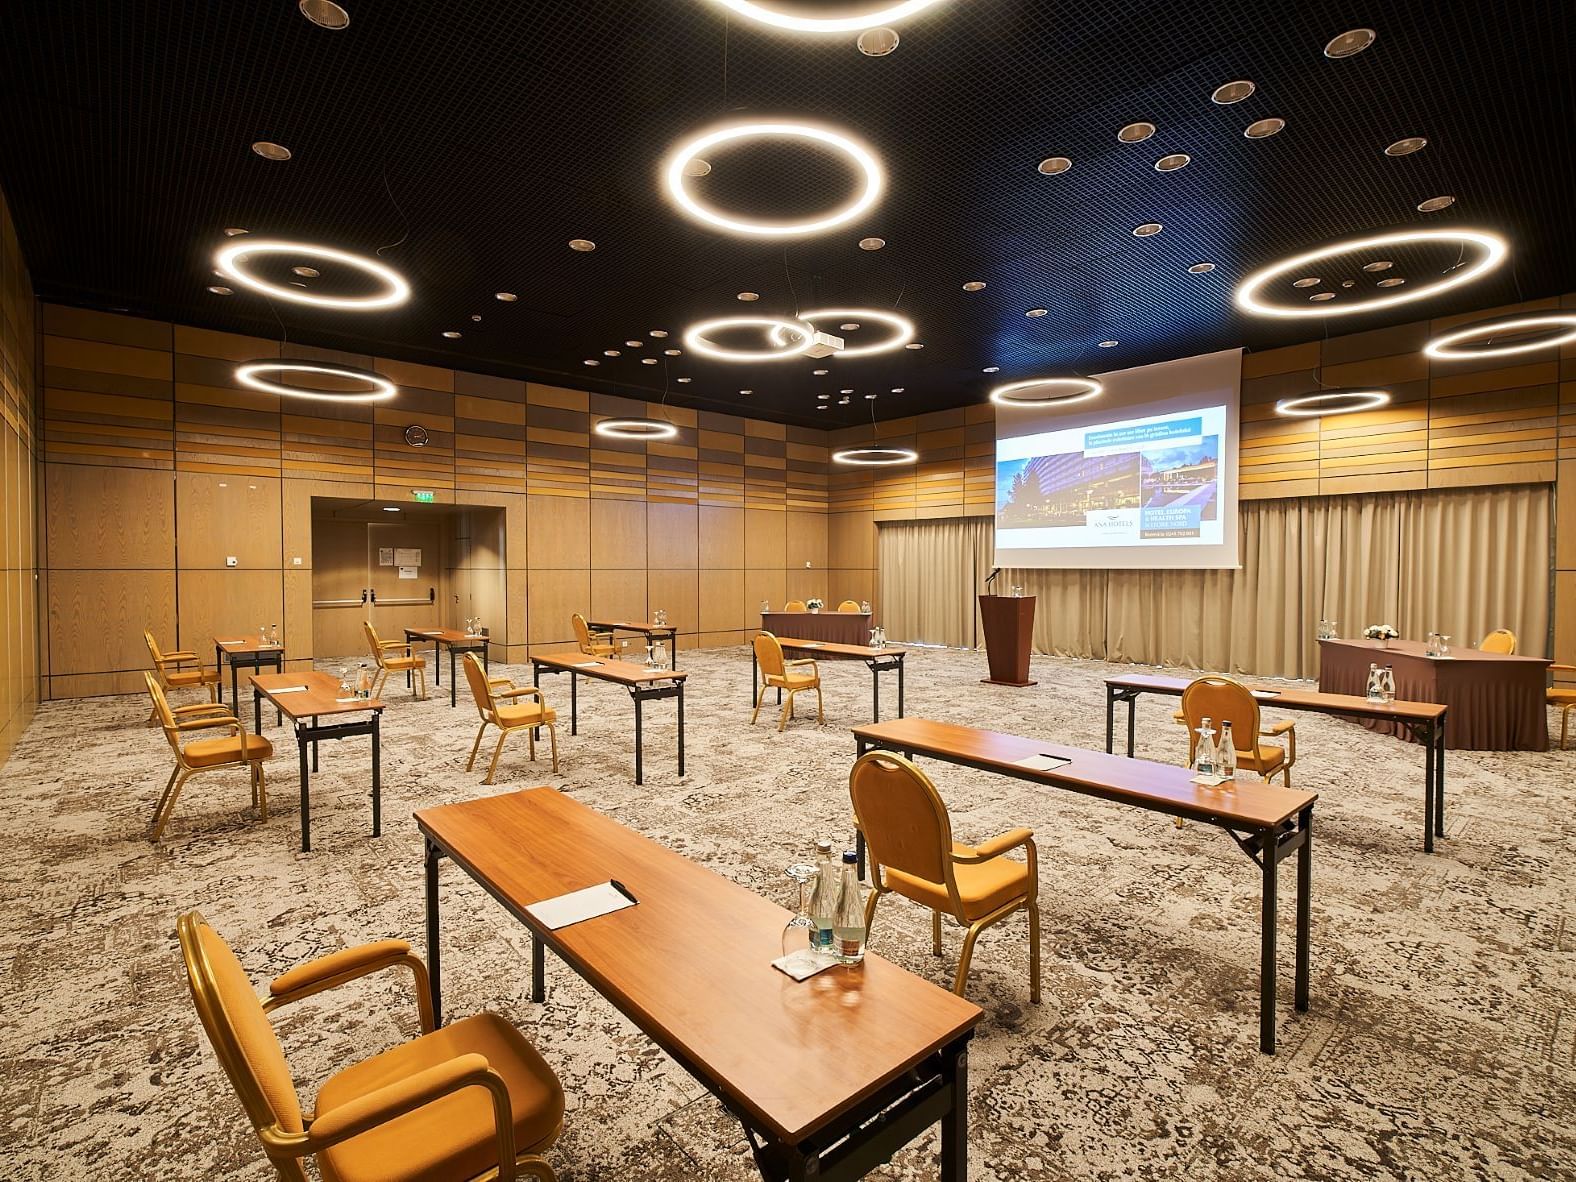 Classroom set-up in Phoenix Room at Ana Hotels Europa